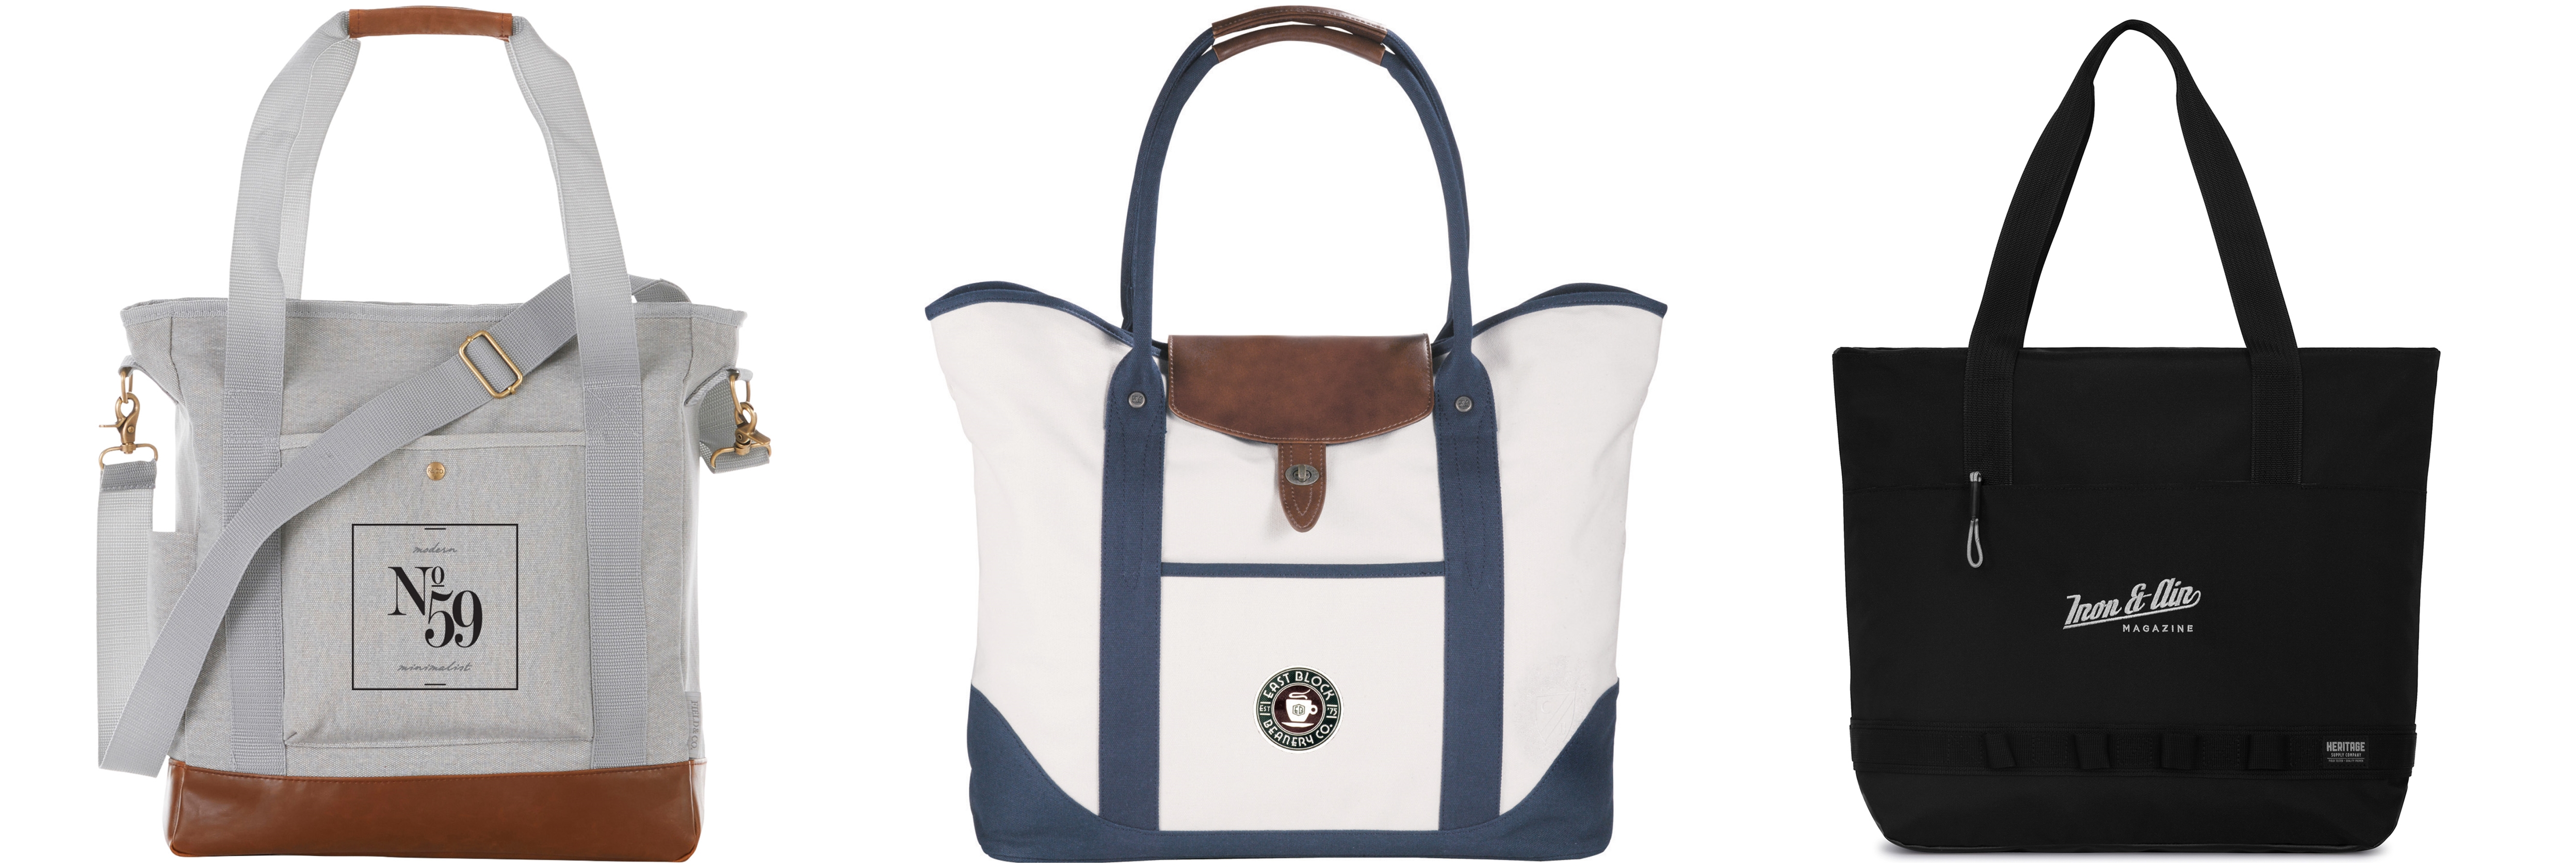 6 Reasons to Promote with Tote – NYFIFTH BLOG